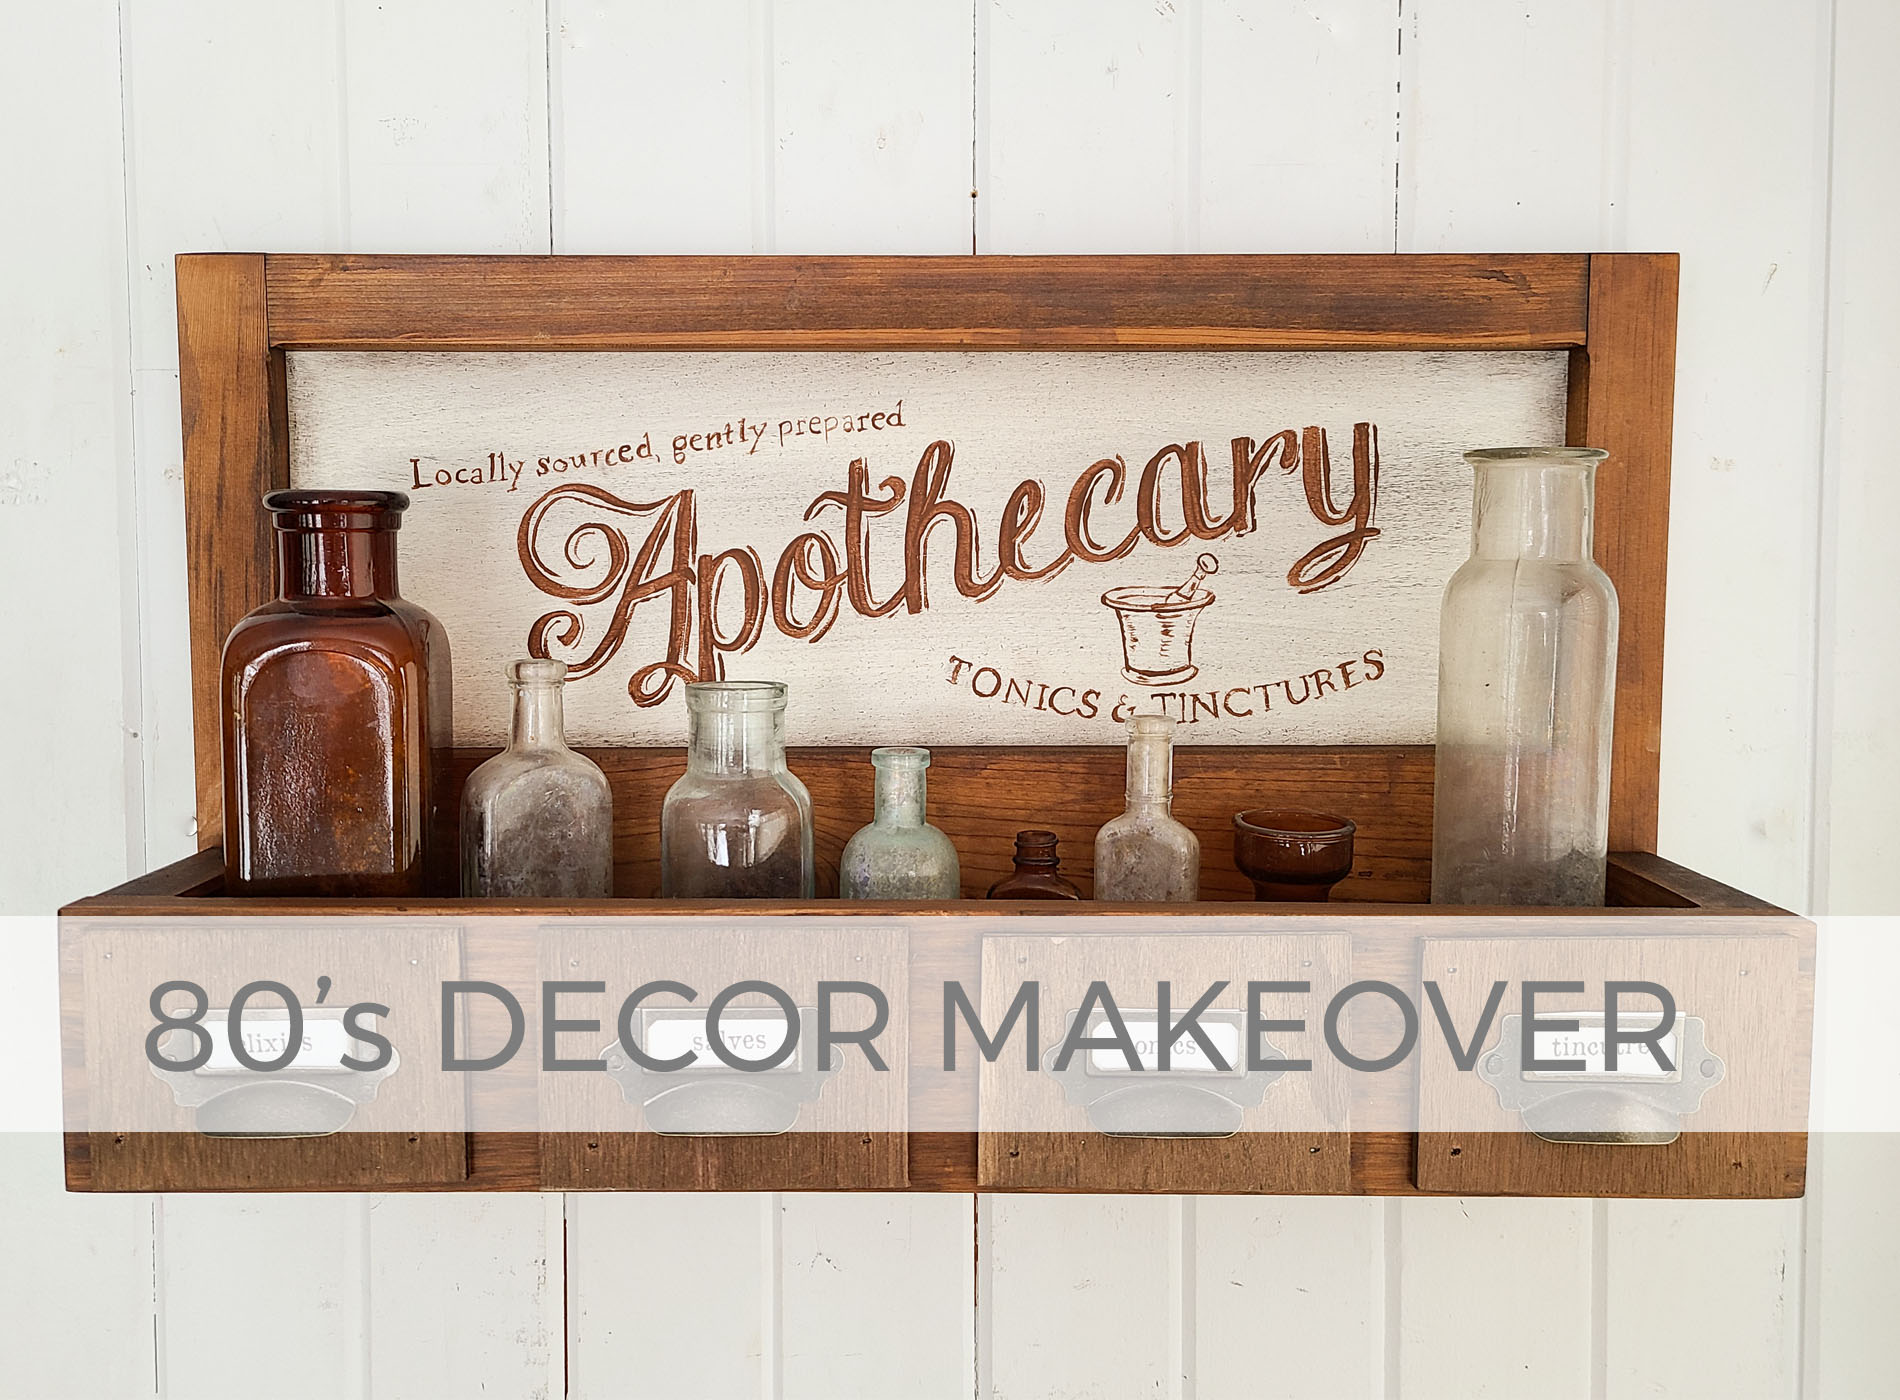 Gallery 80's Decor Makeover by Larissa of Prodigal Pieces | prodigalpieces.com #prodigalpieces